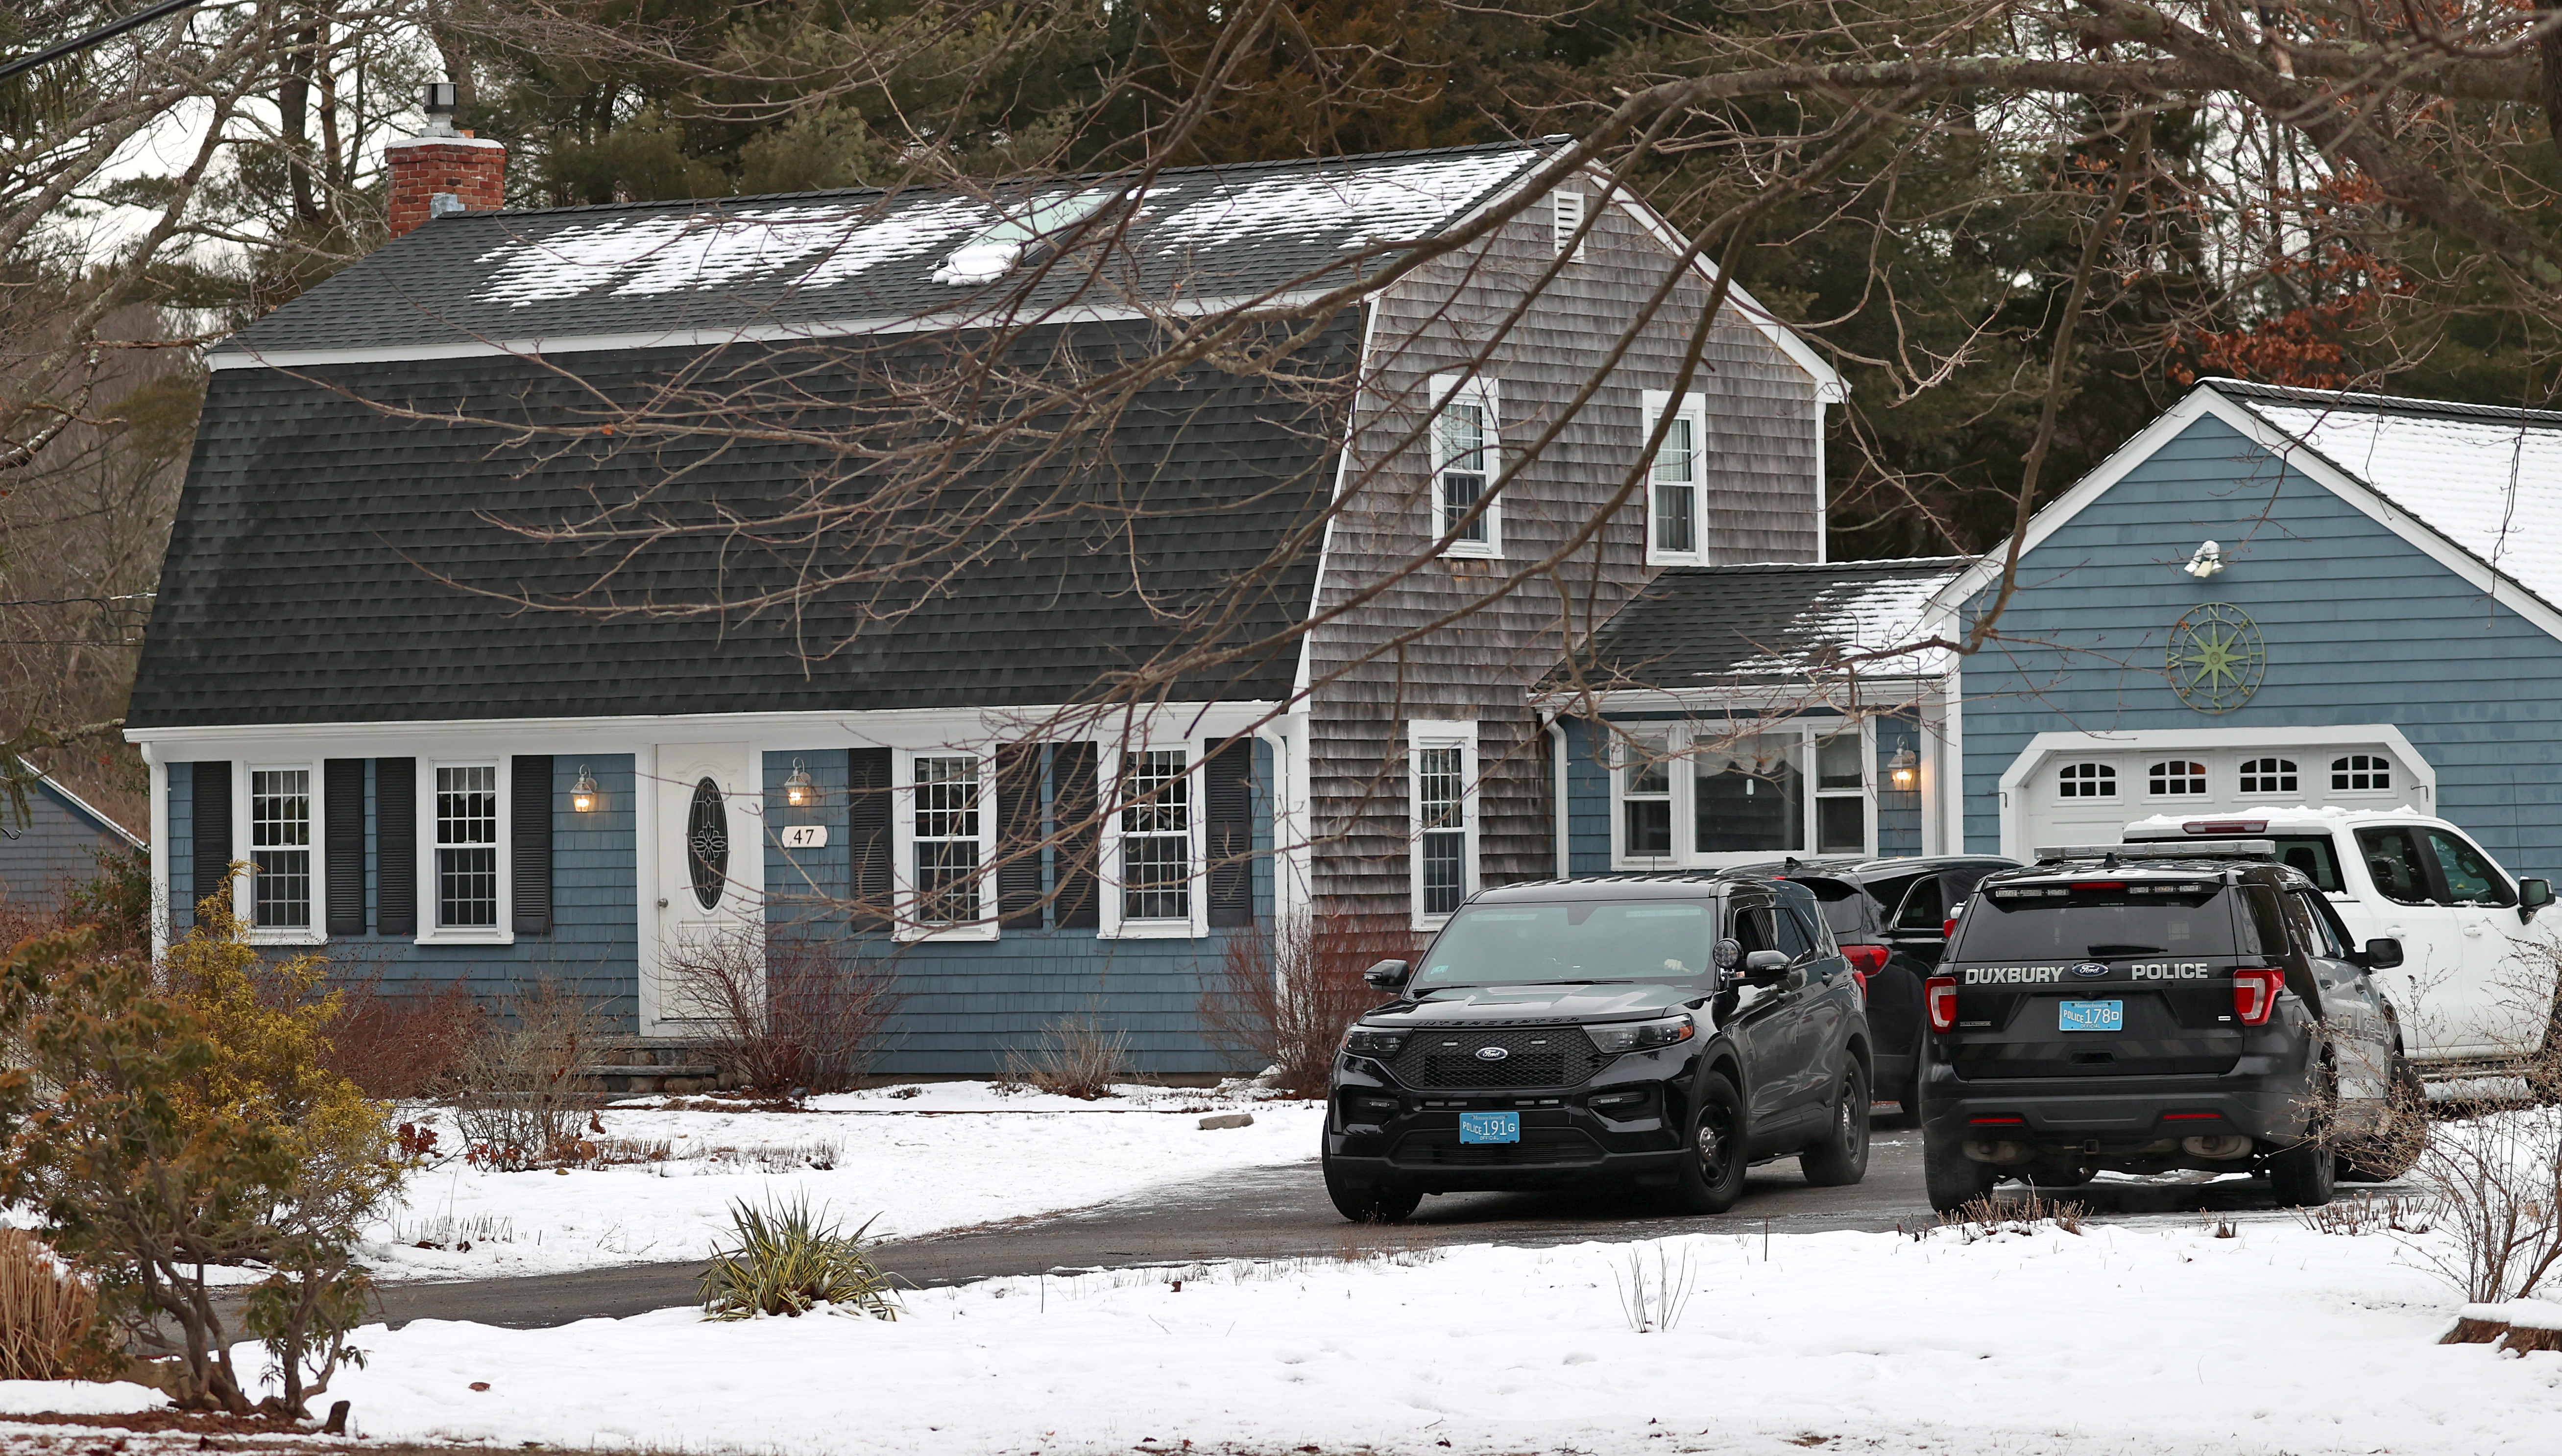 Timeline of Duxbury killings: Prosecutor lays out case against 